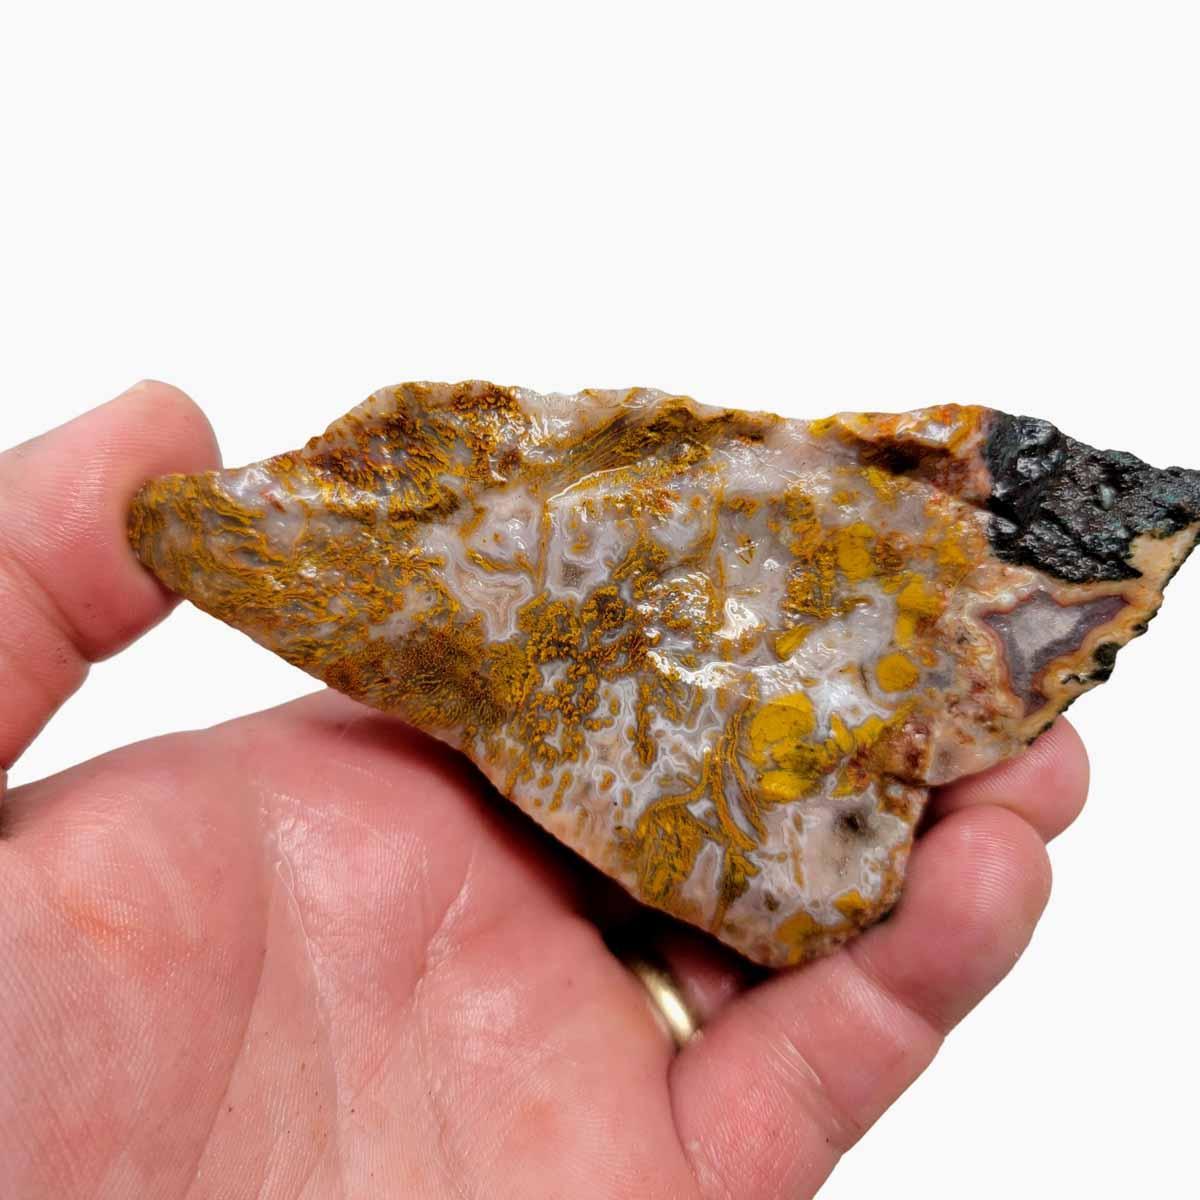 Apple Valley Agate Rough Chunk! - LapidaryCentral